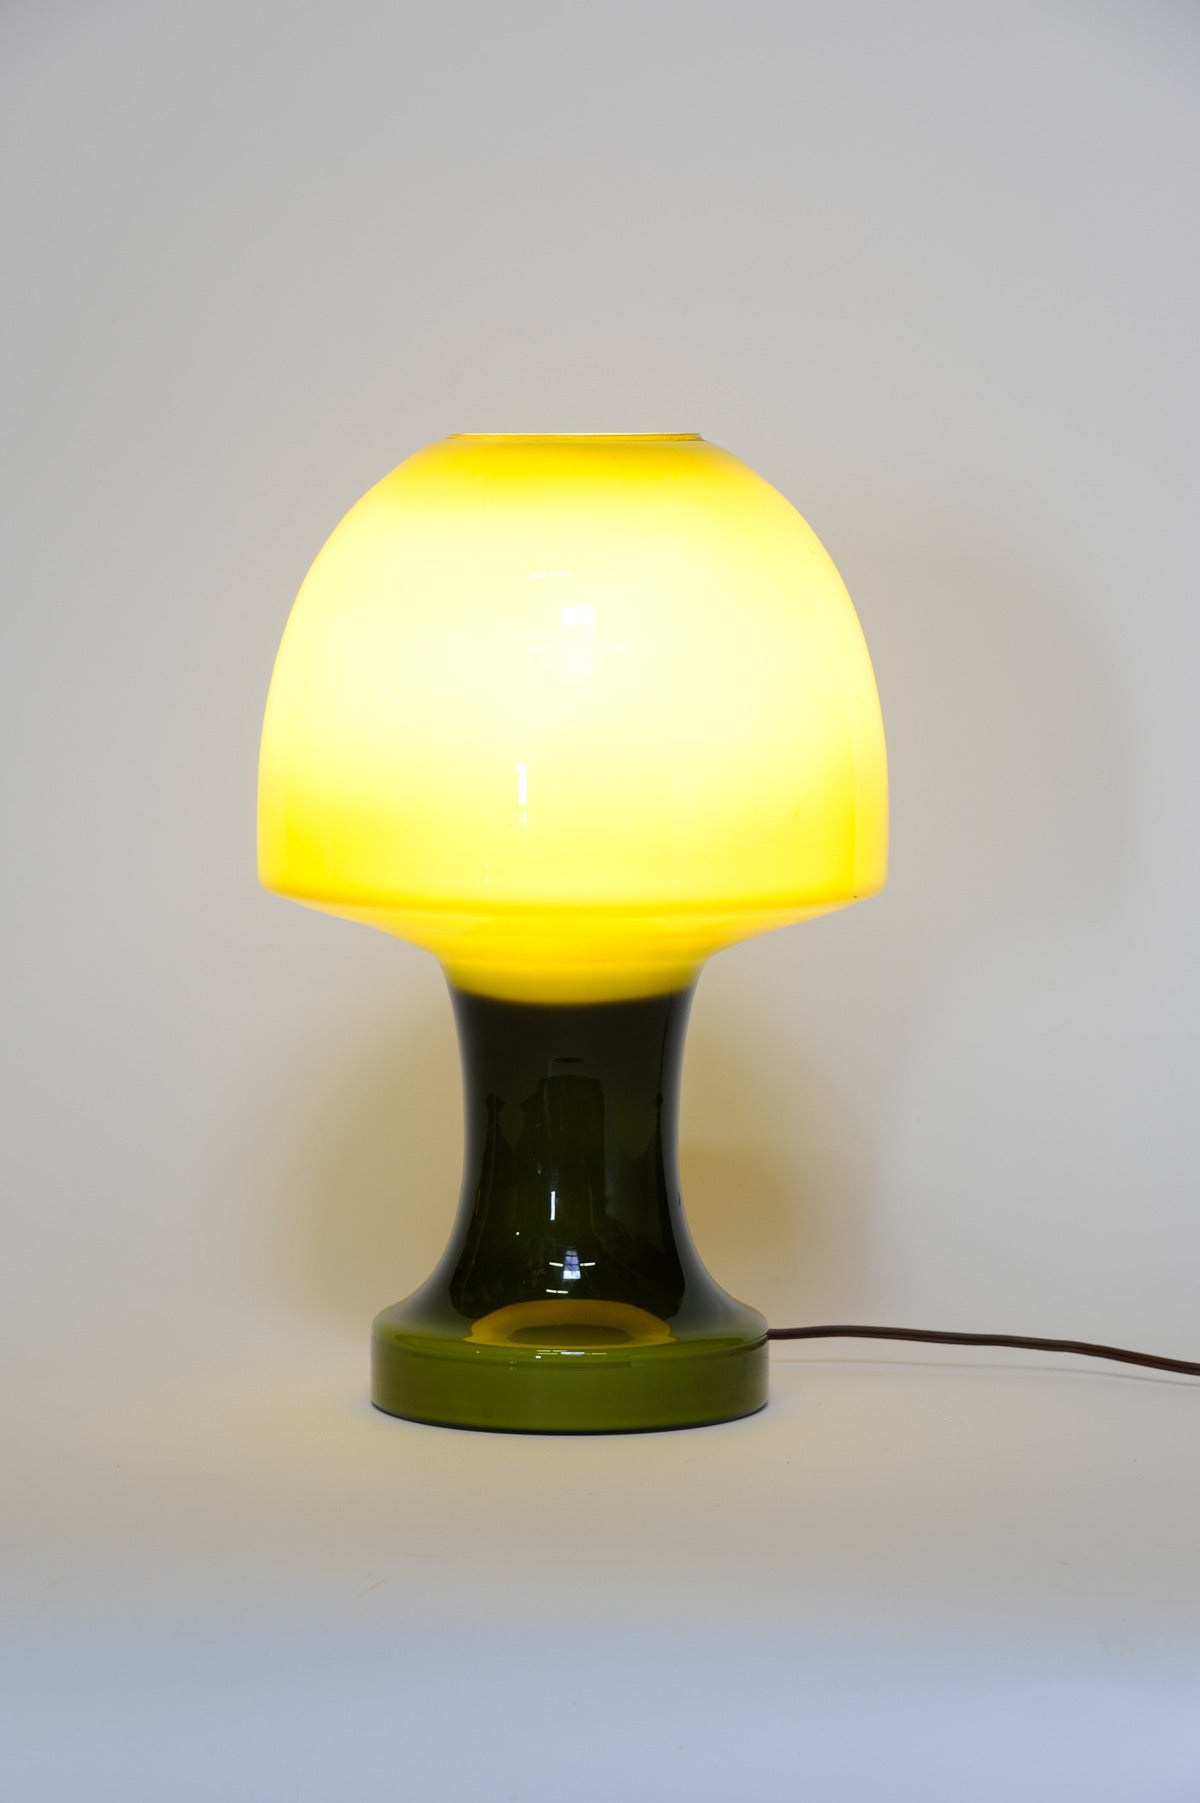 An amazing Italian green mushroom lamp that simply glow when light up. A deep and rich green glass that speaks of the quality glass blowing and refinement of the Italians.